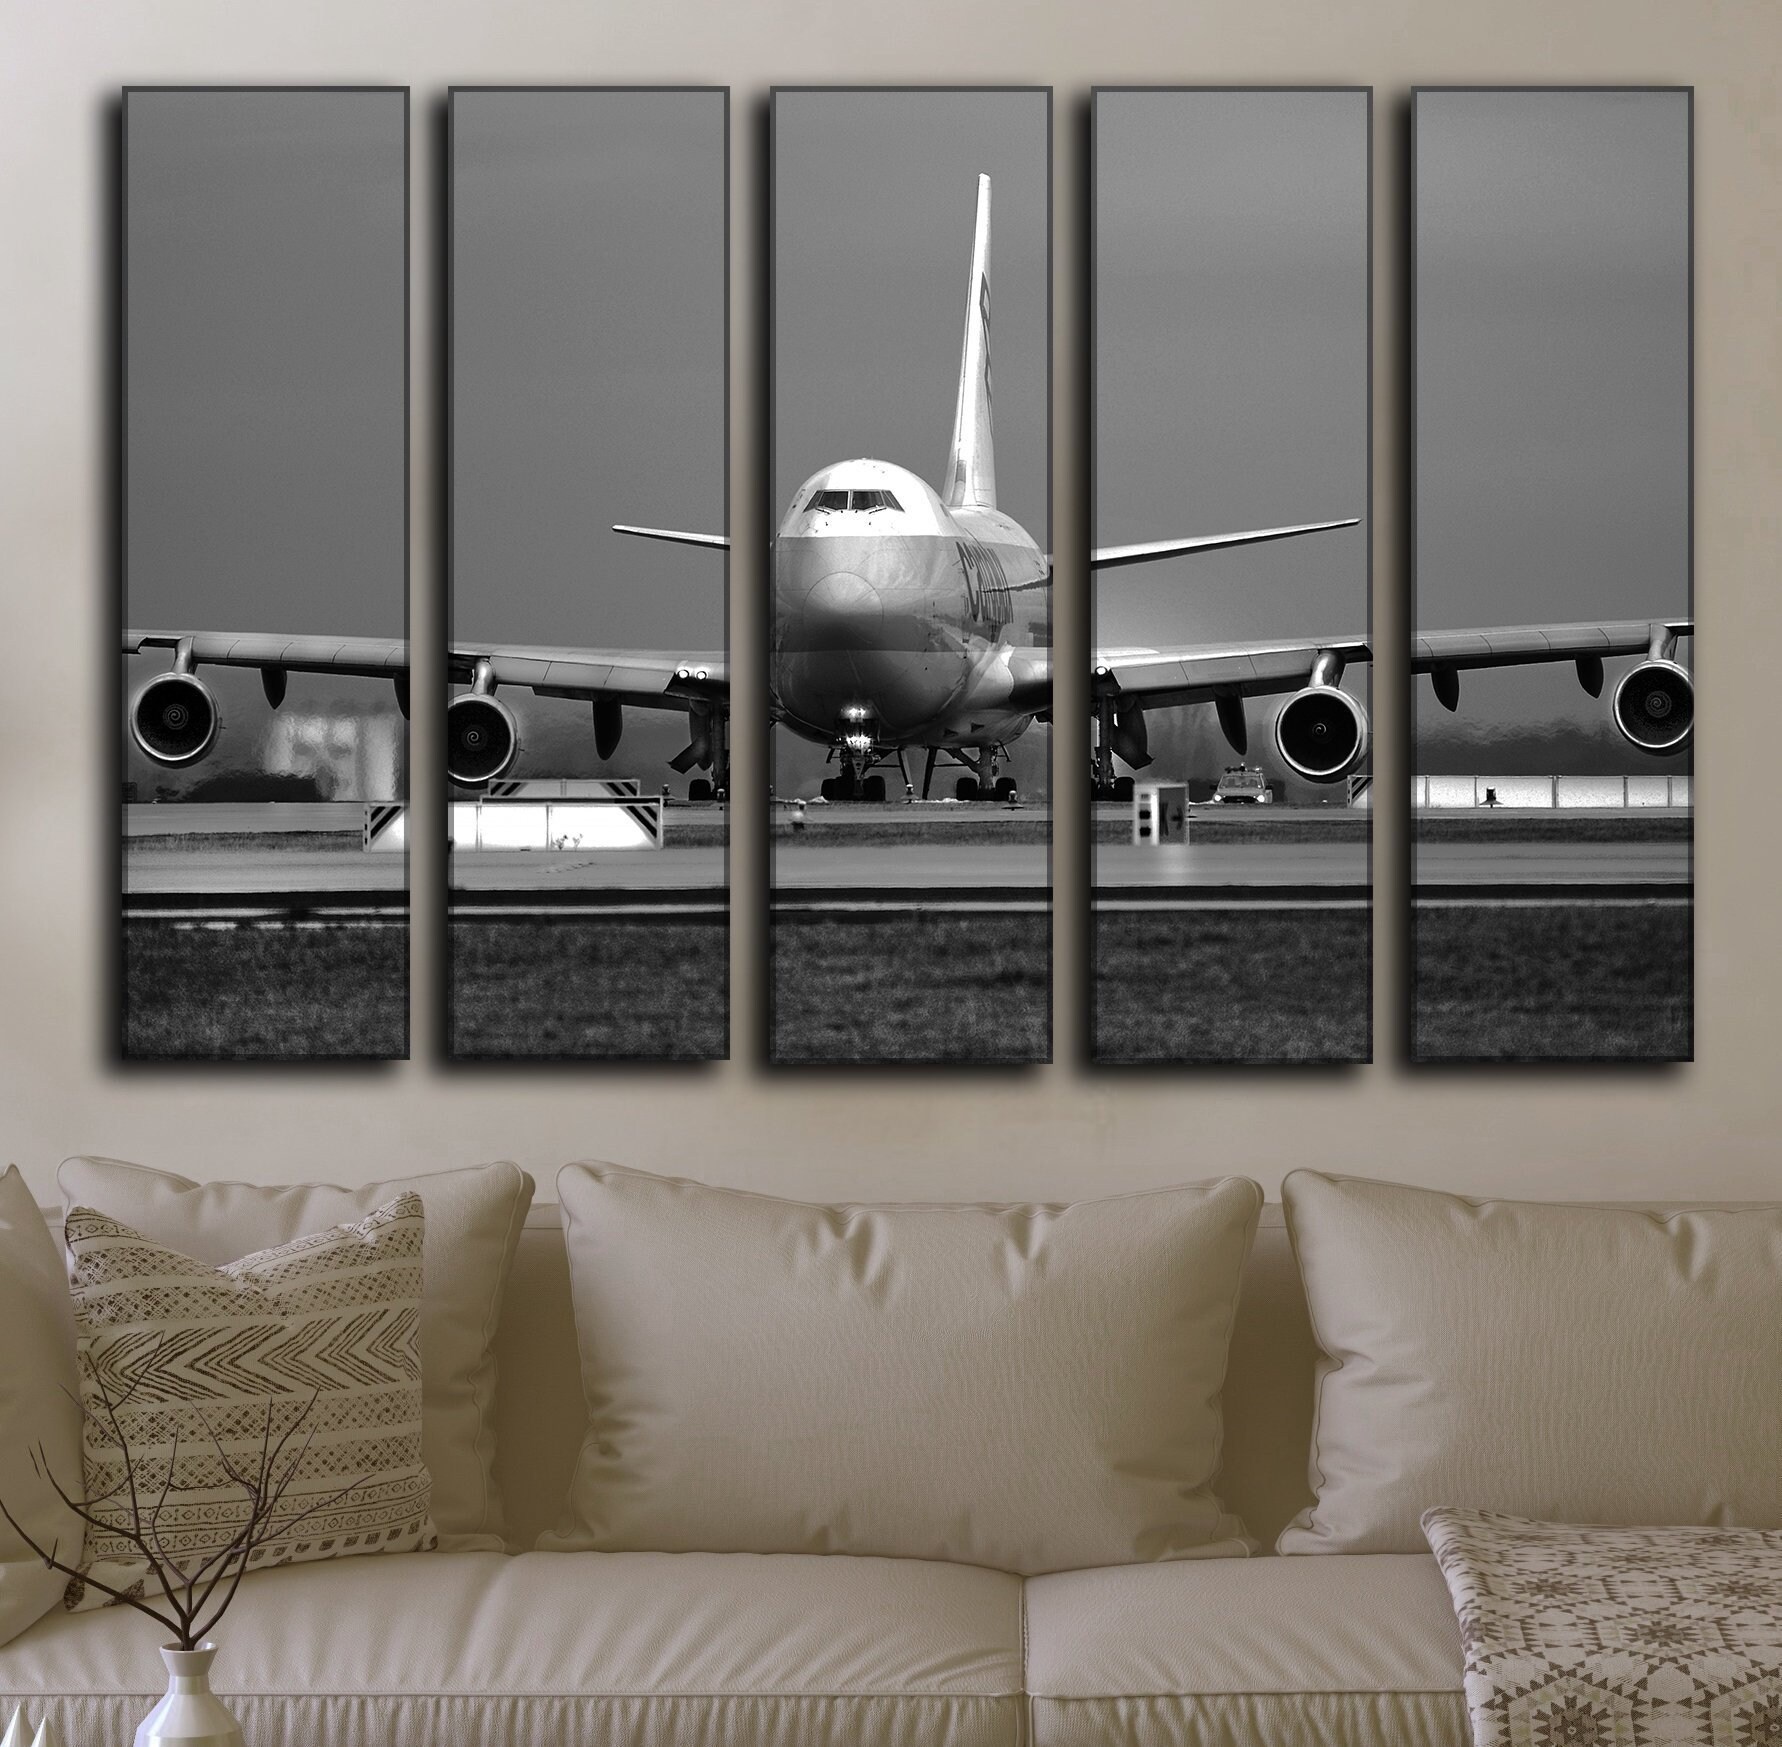 BOEING 737 AEROPLANE AIRCRAFT WALL POSTER ART PICTURE PRINT LARGE HUGE 